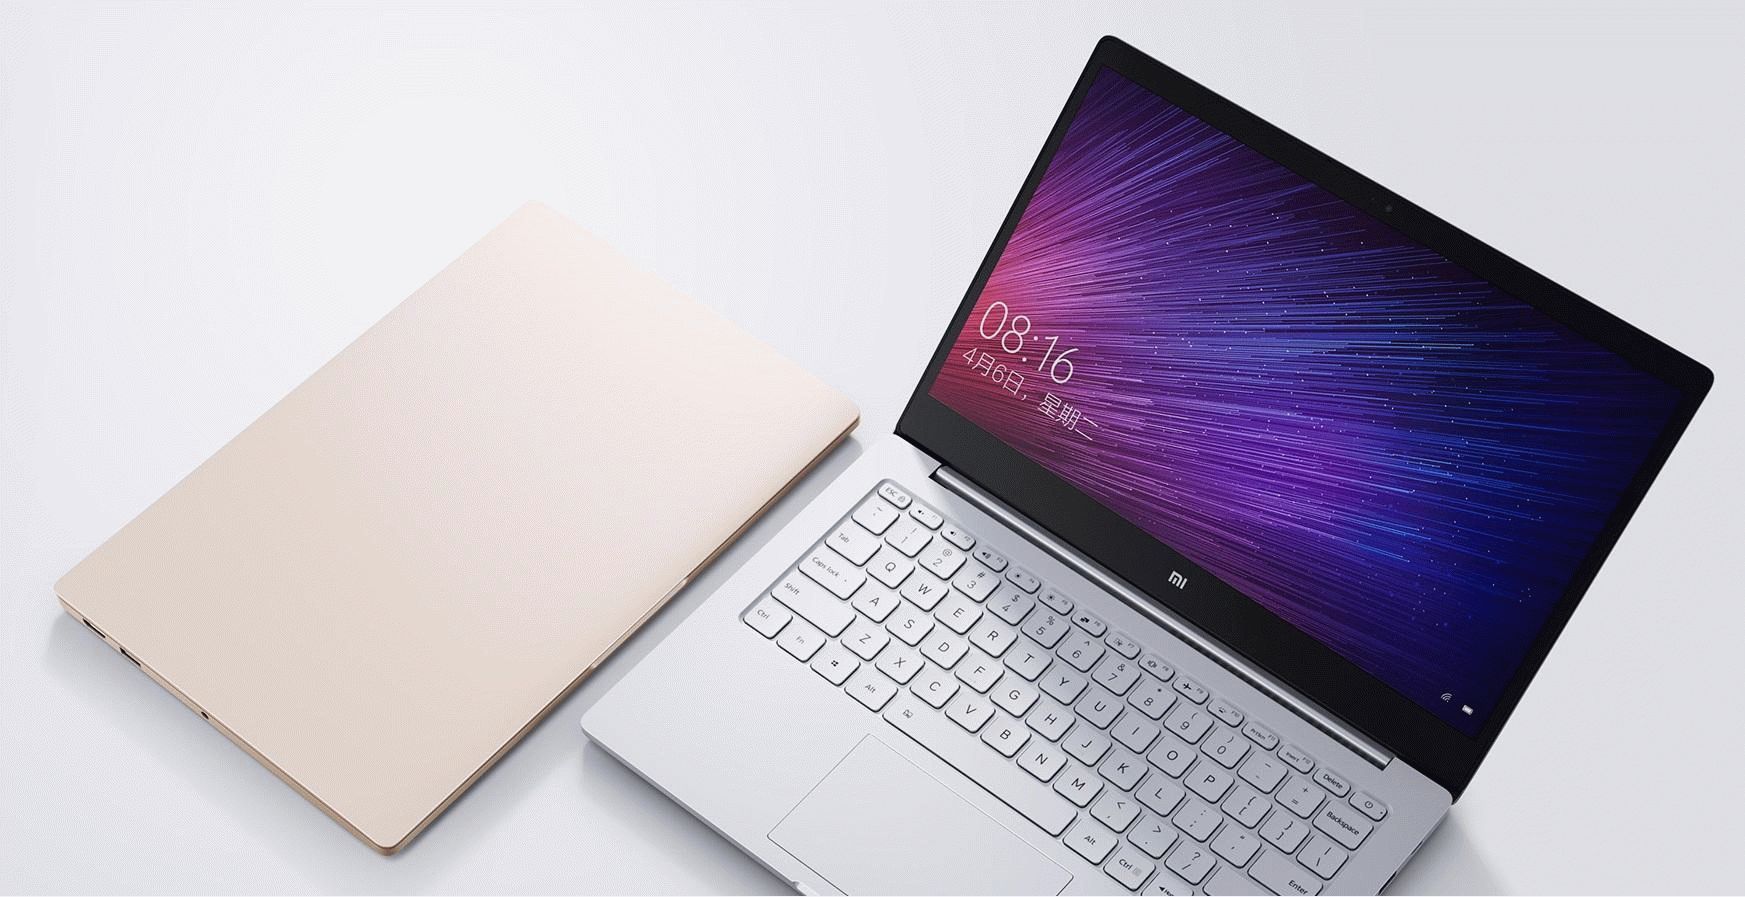 The best Chinese laptops in 2022